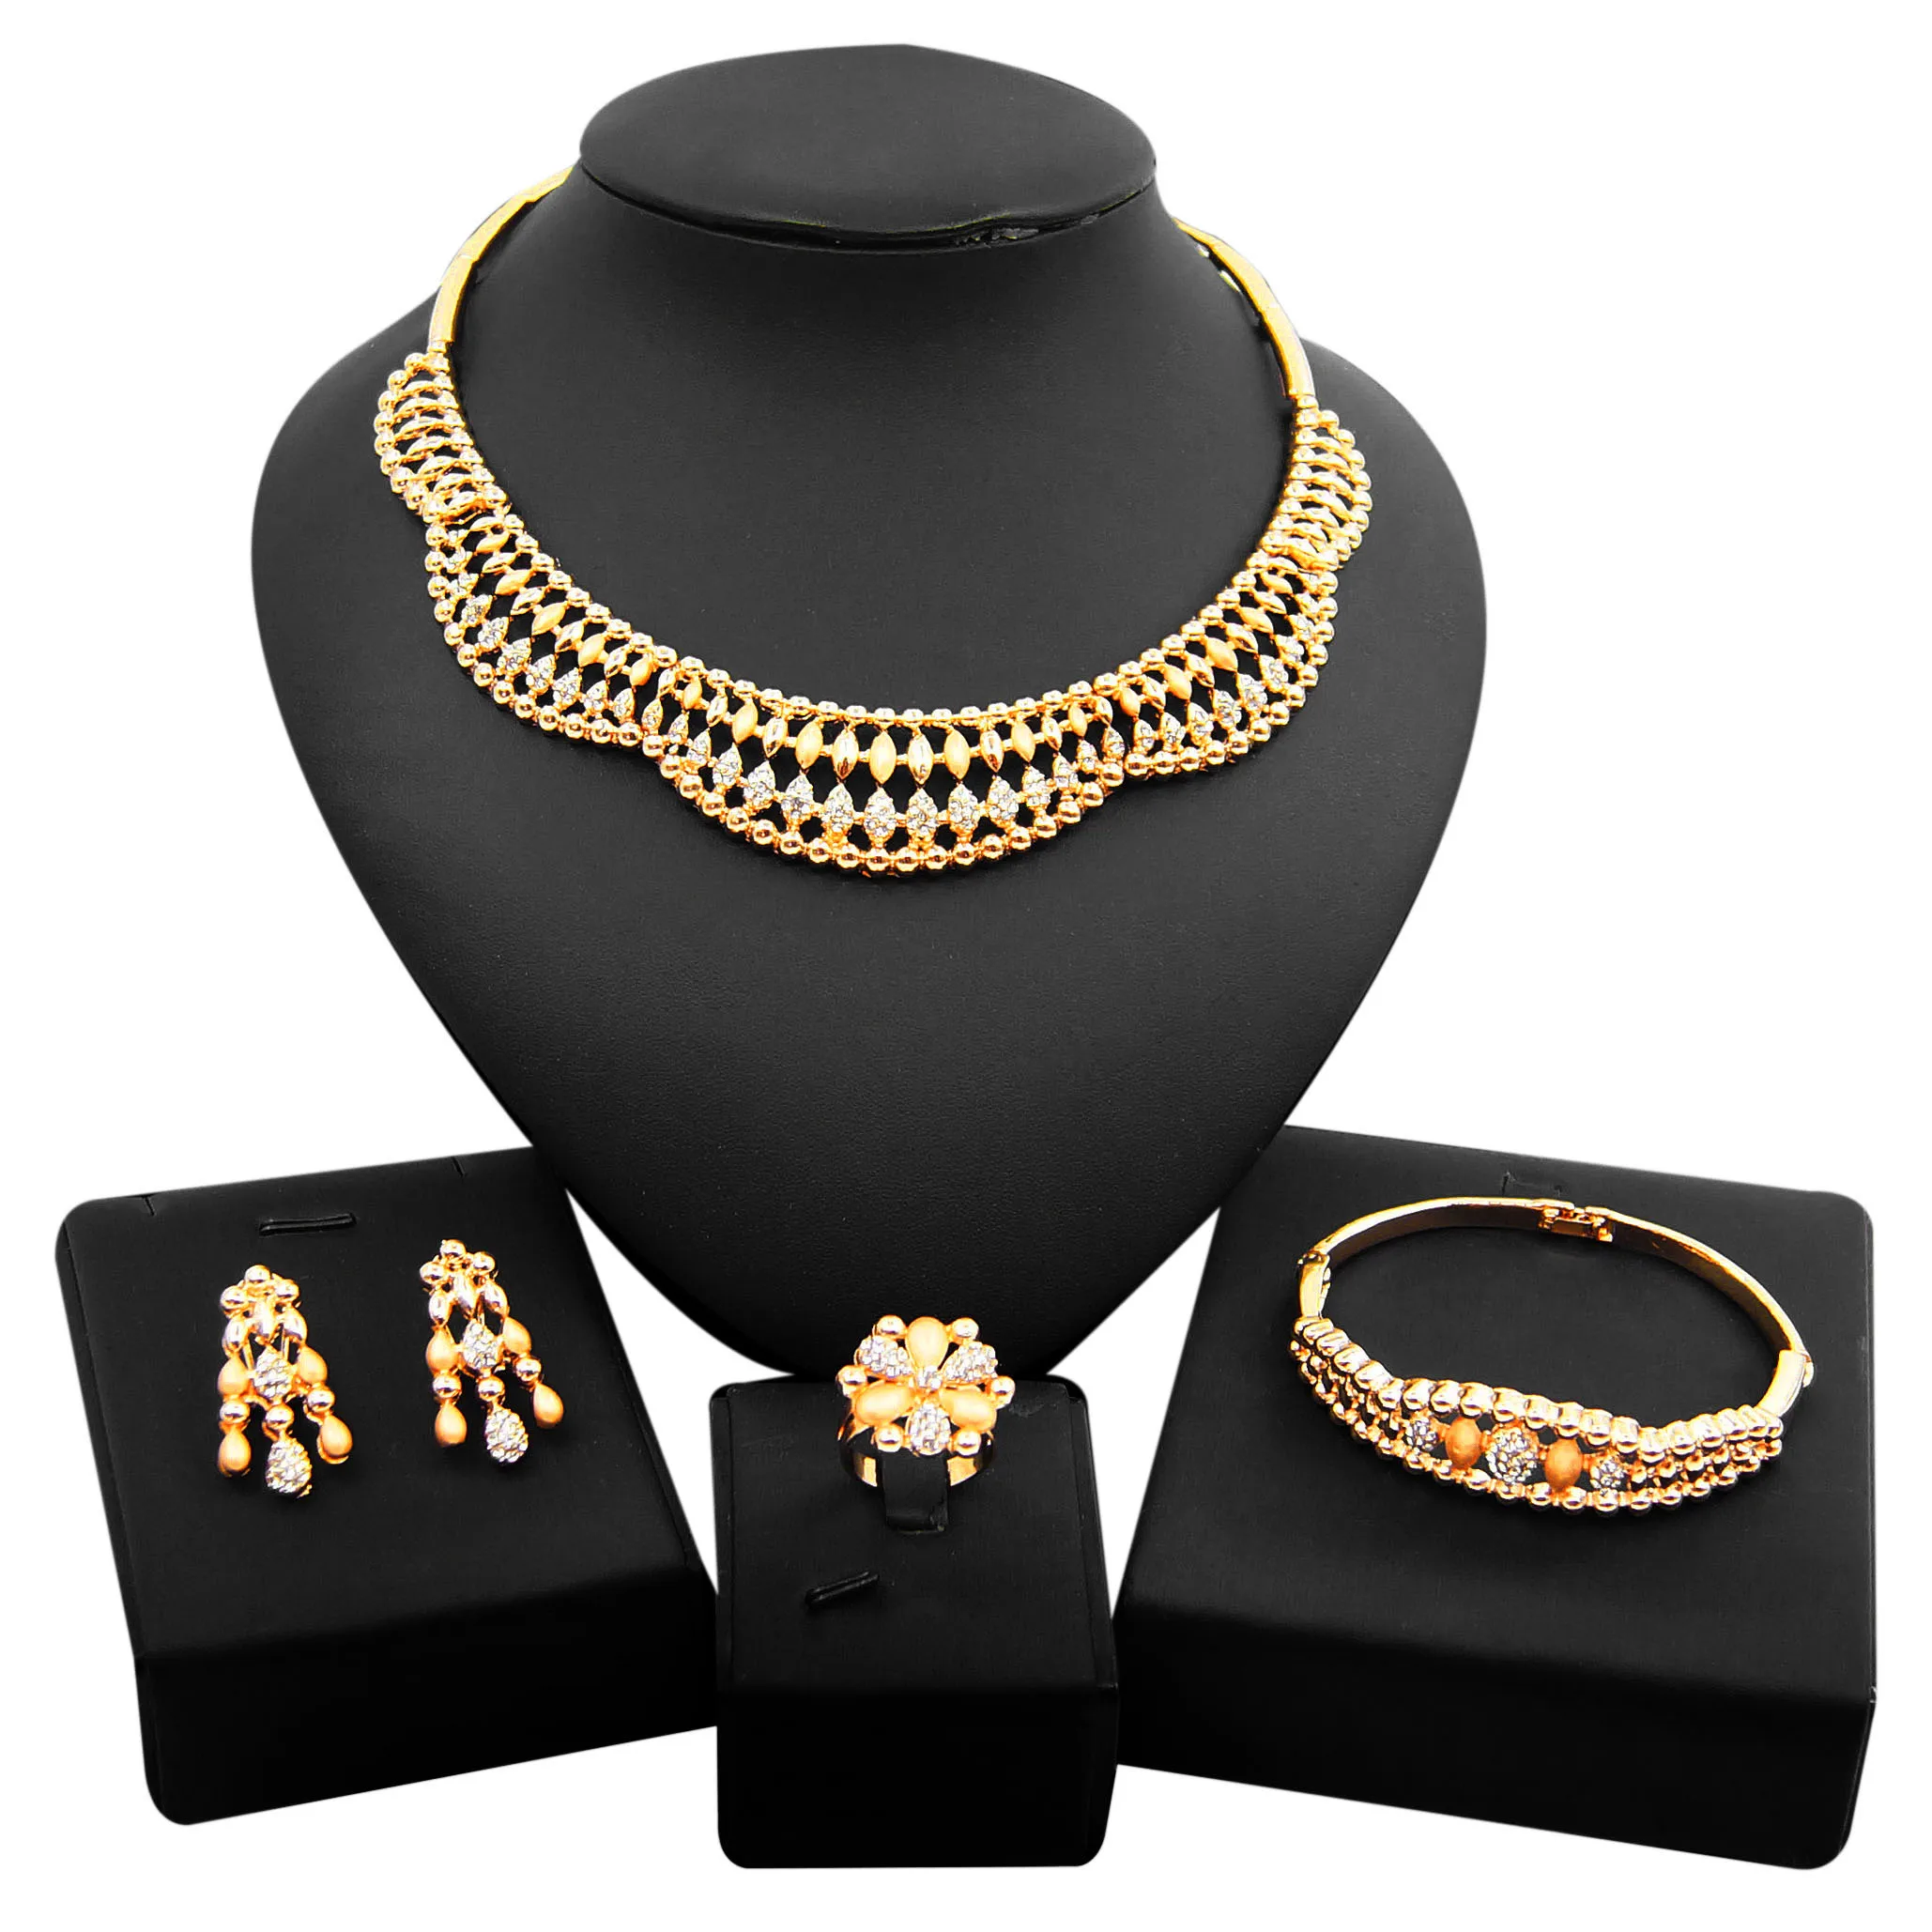 

Yulaili New Design Fashion Romanian Gold Style Jewelleries Set Fine Gift Copper Alloy Women Cheap Necklaces Crystal Wedding Sets